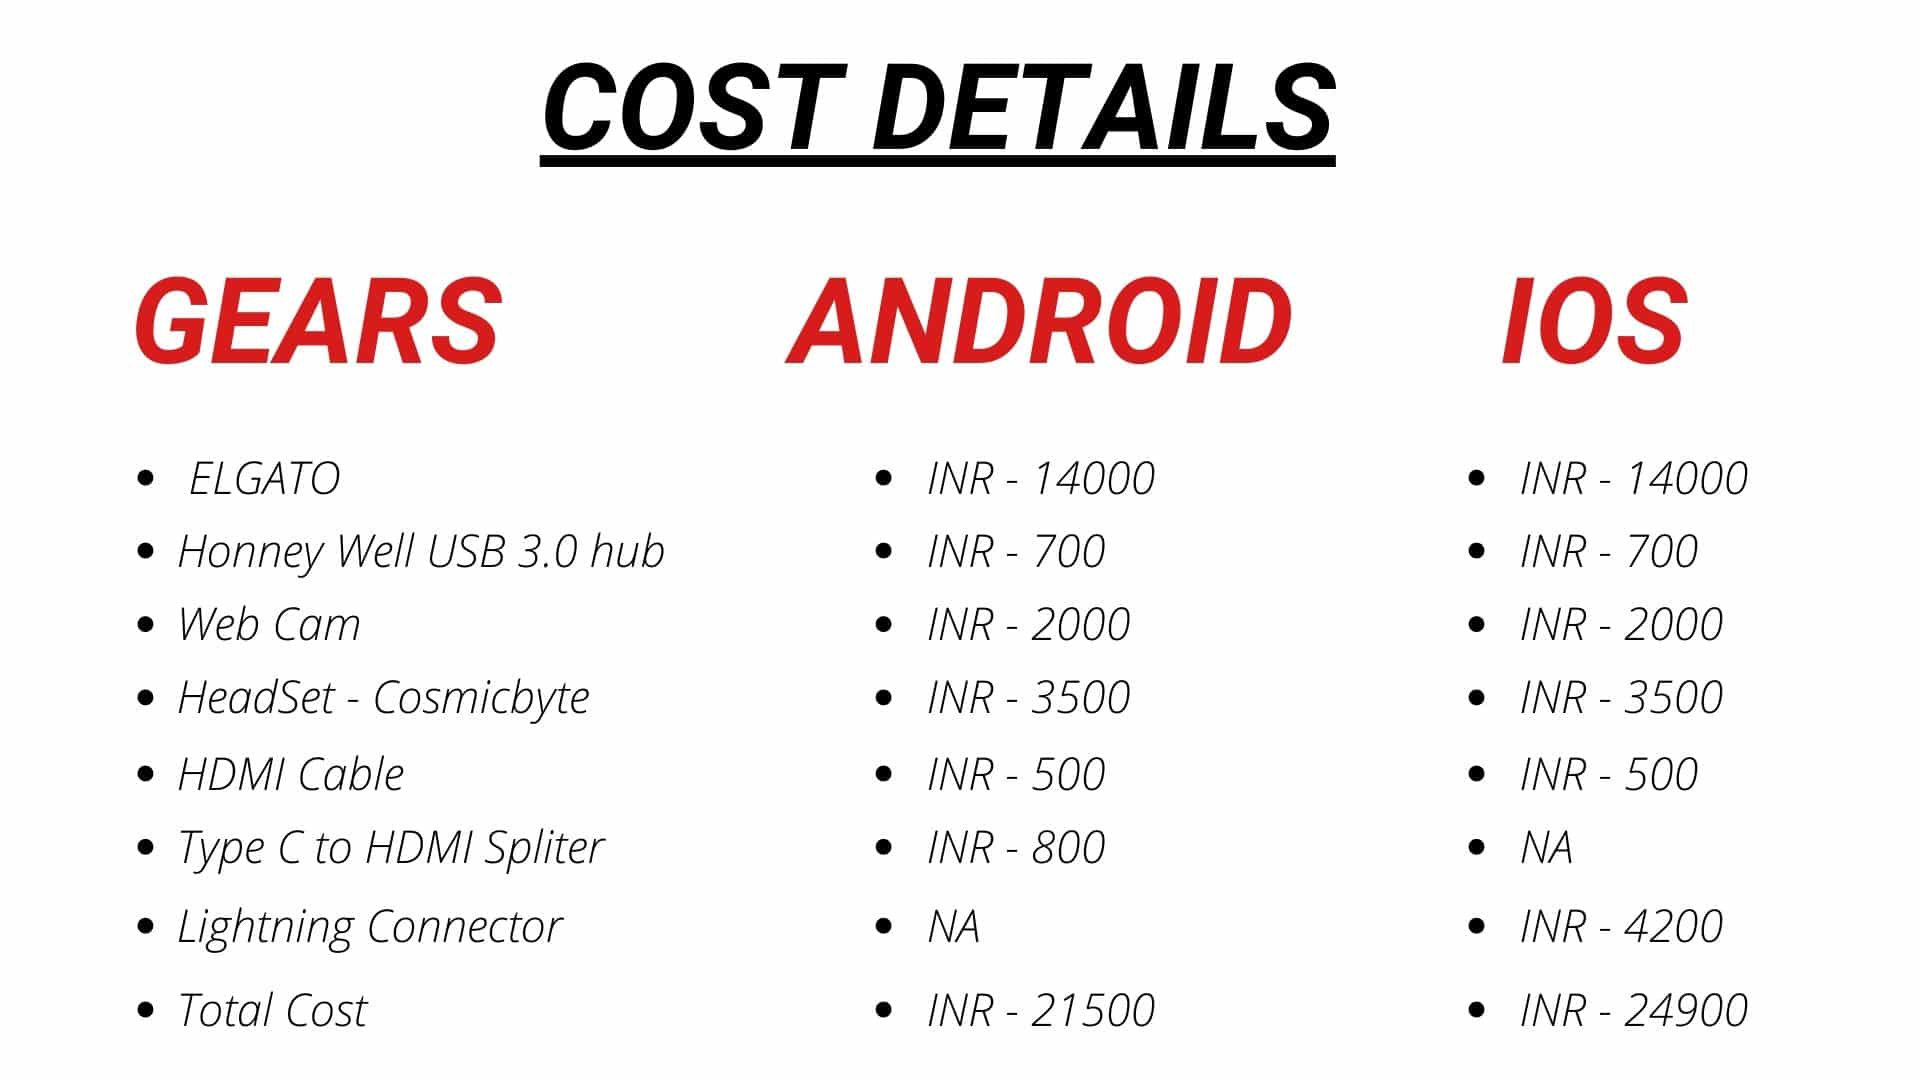 COST DETAILS